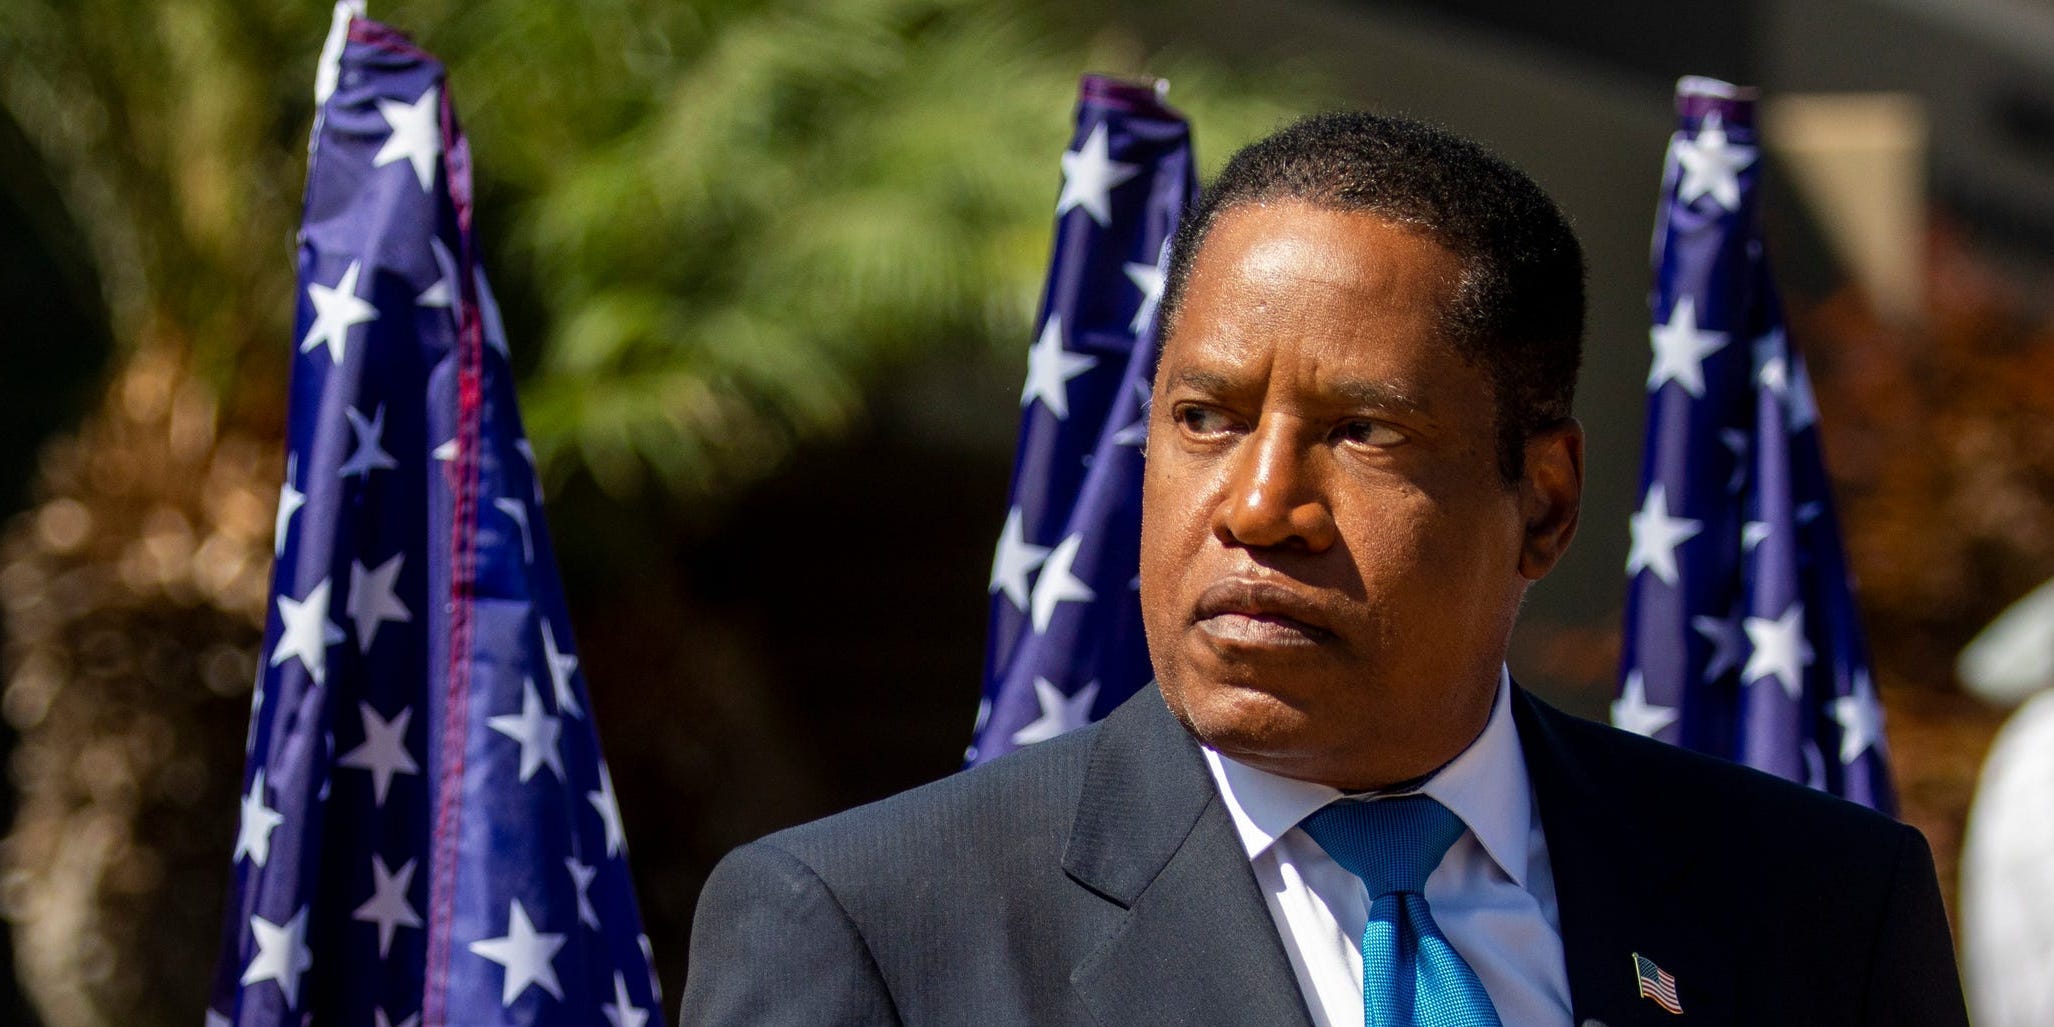 Larry Elder launched a website claiming voter fraud in the California